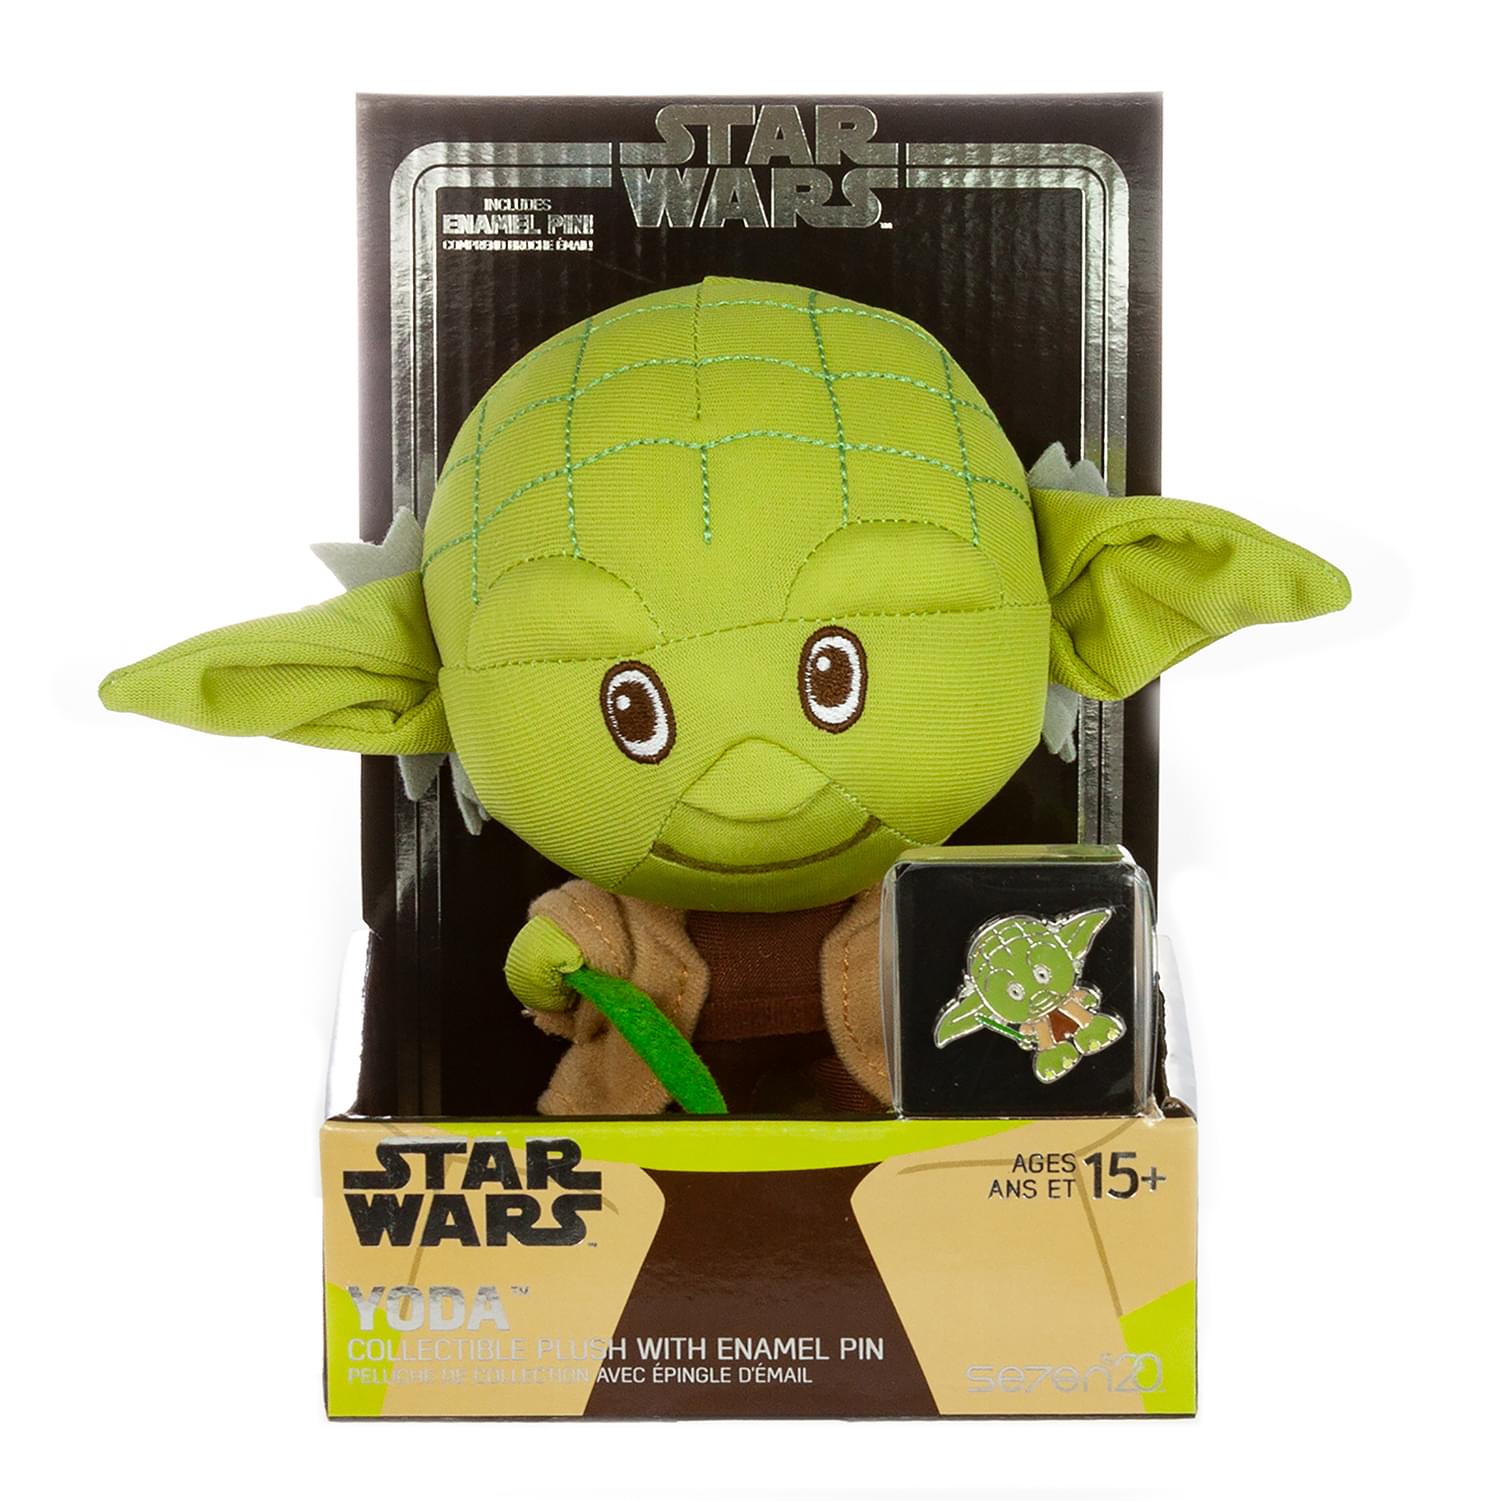 Star Wars Baby Yoda and R2-D2 Stylized 7 Inch Plush Set of 2 With Enamel Pins